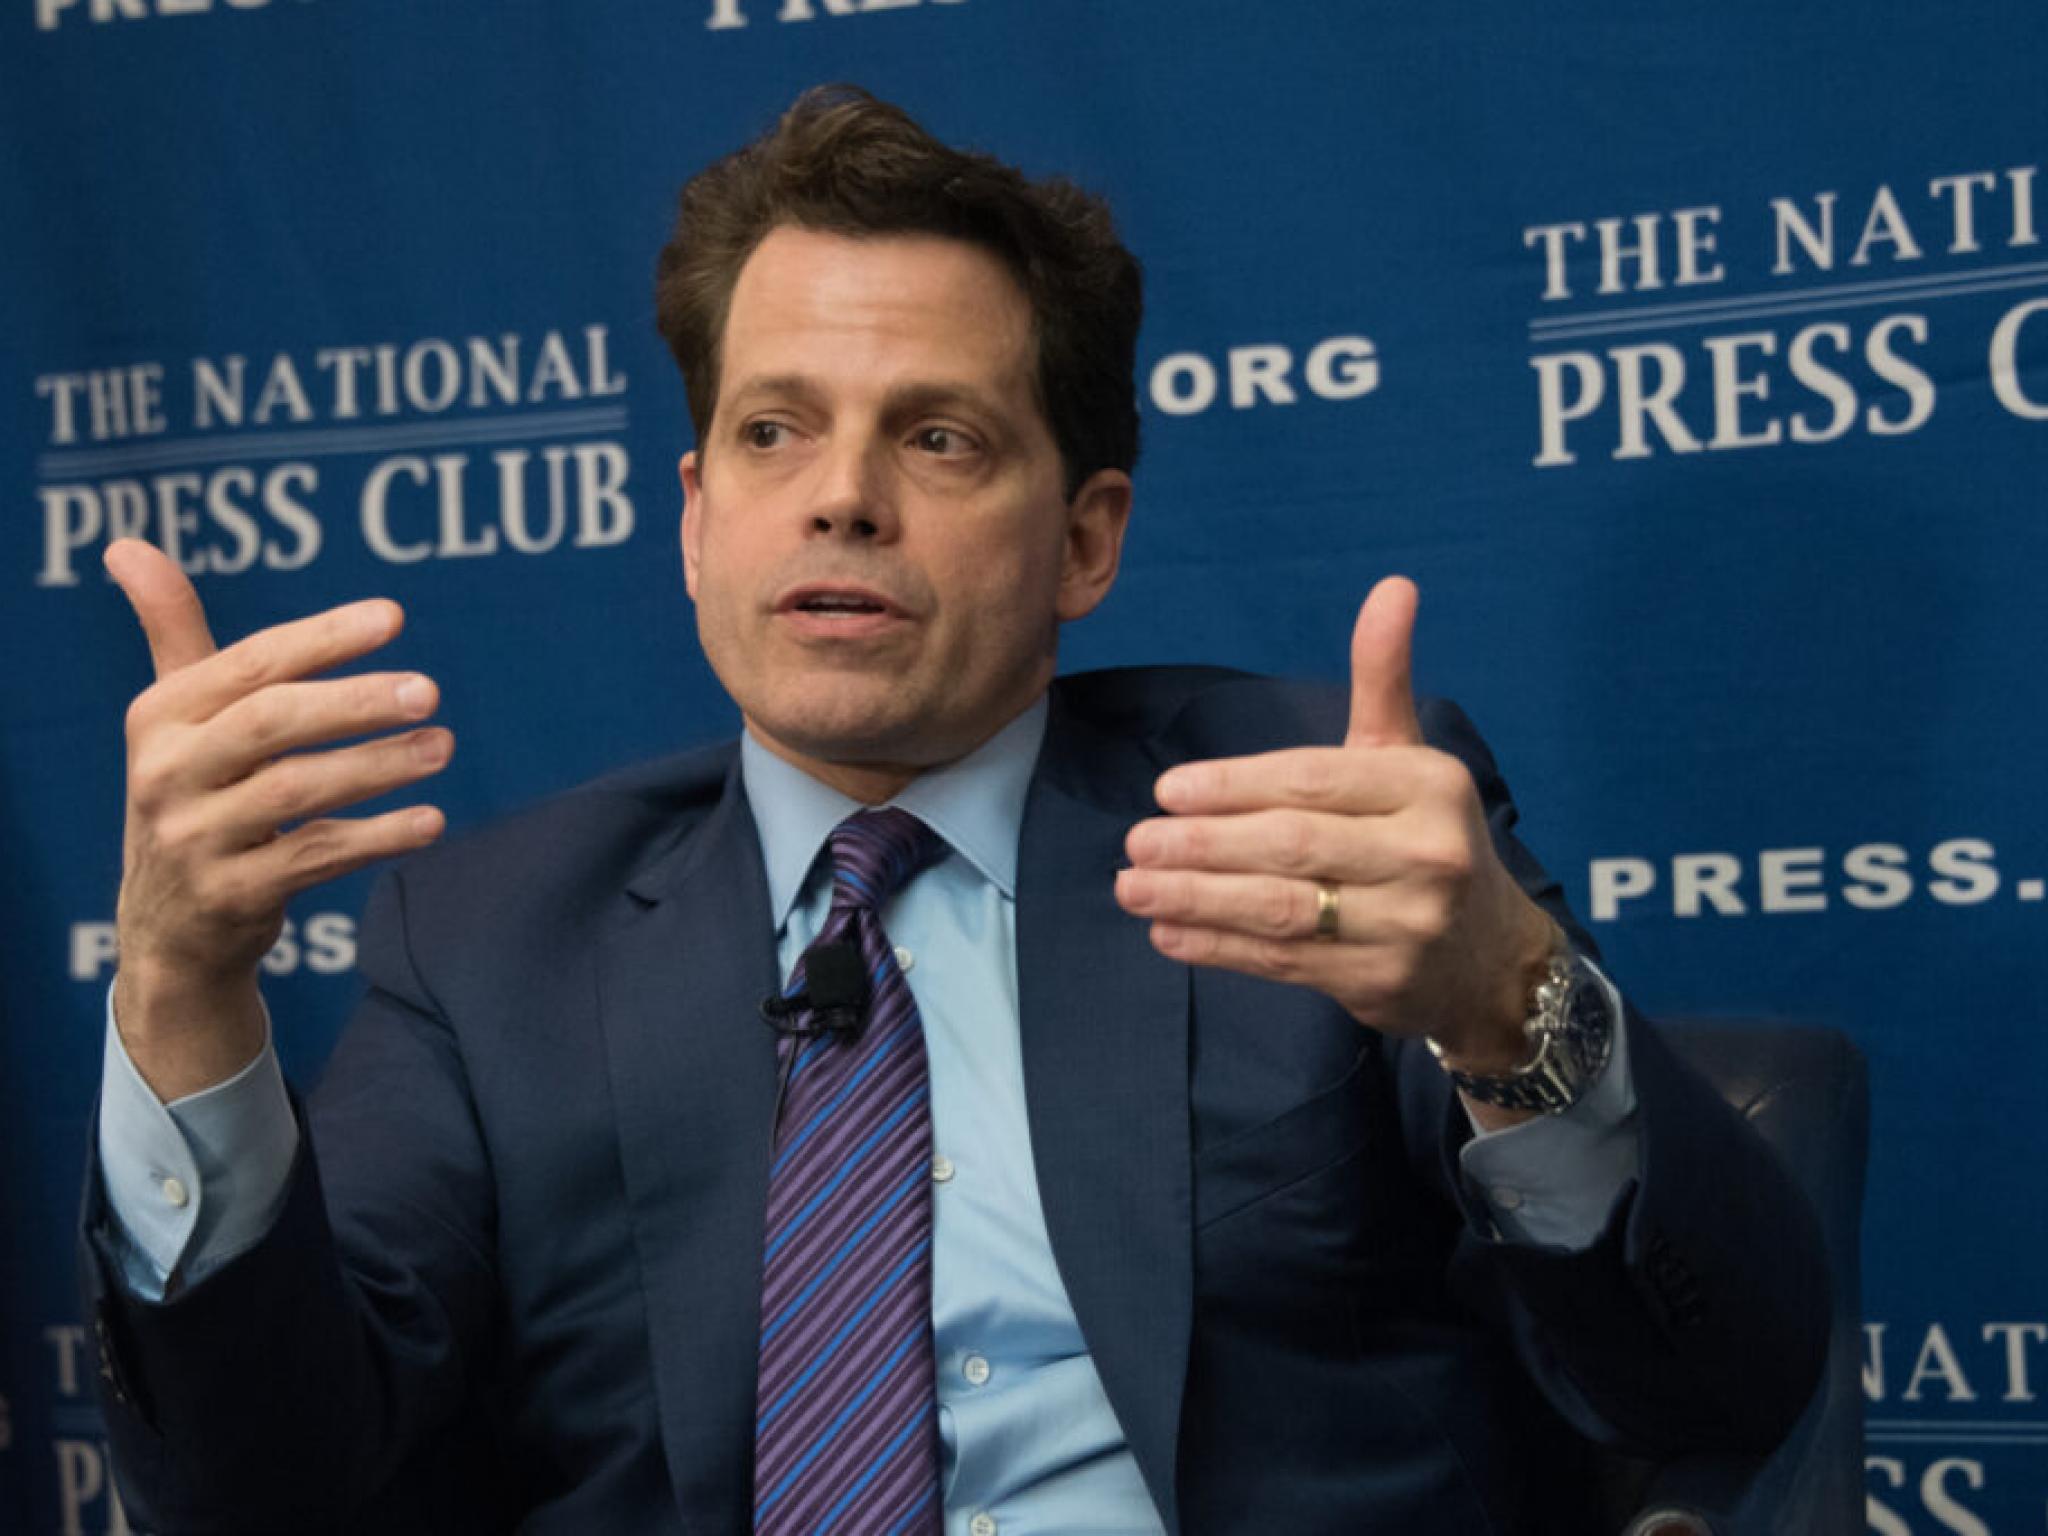  anthony-scaramucci-says-crypto-will-soar-if-this-presidential-candidate-wins-the-election-i-think-well-see-all-time-highs-for-bitcoin-and-other-assets 